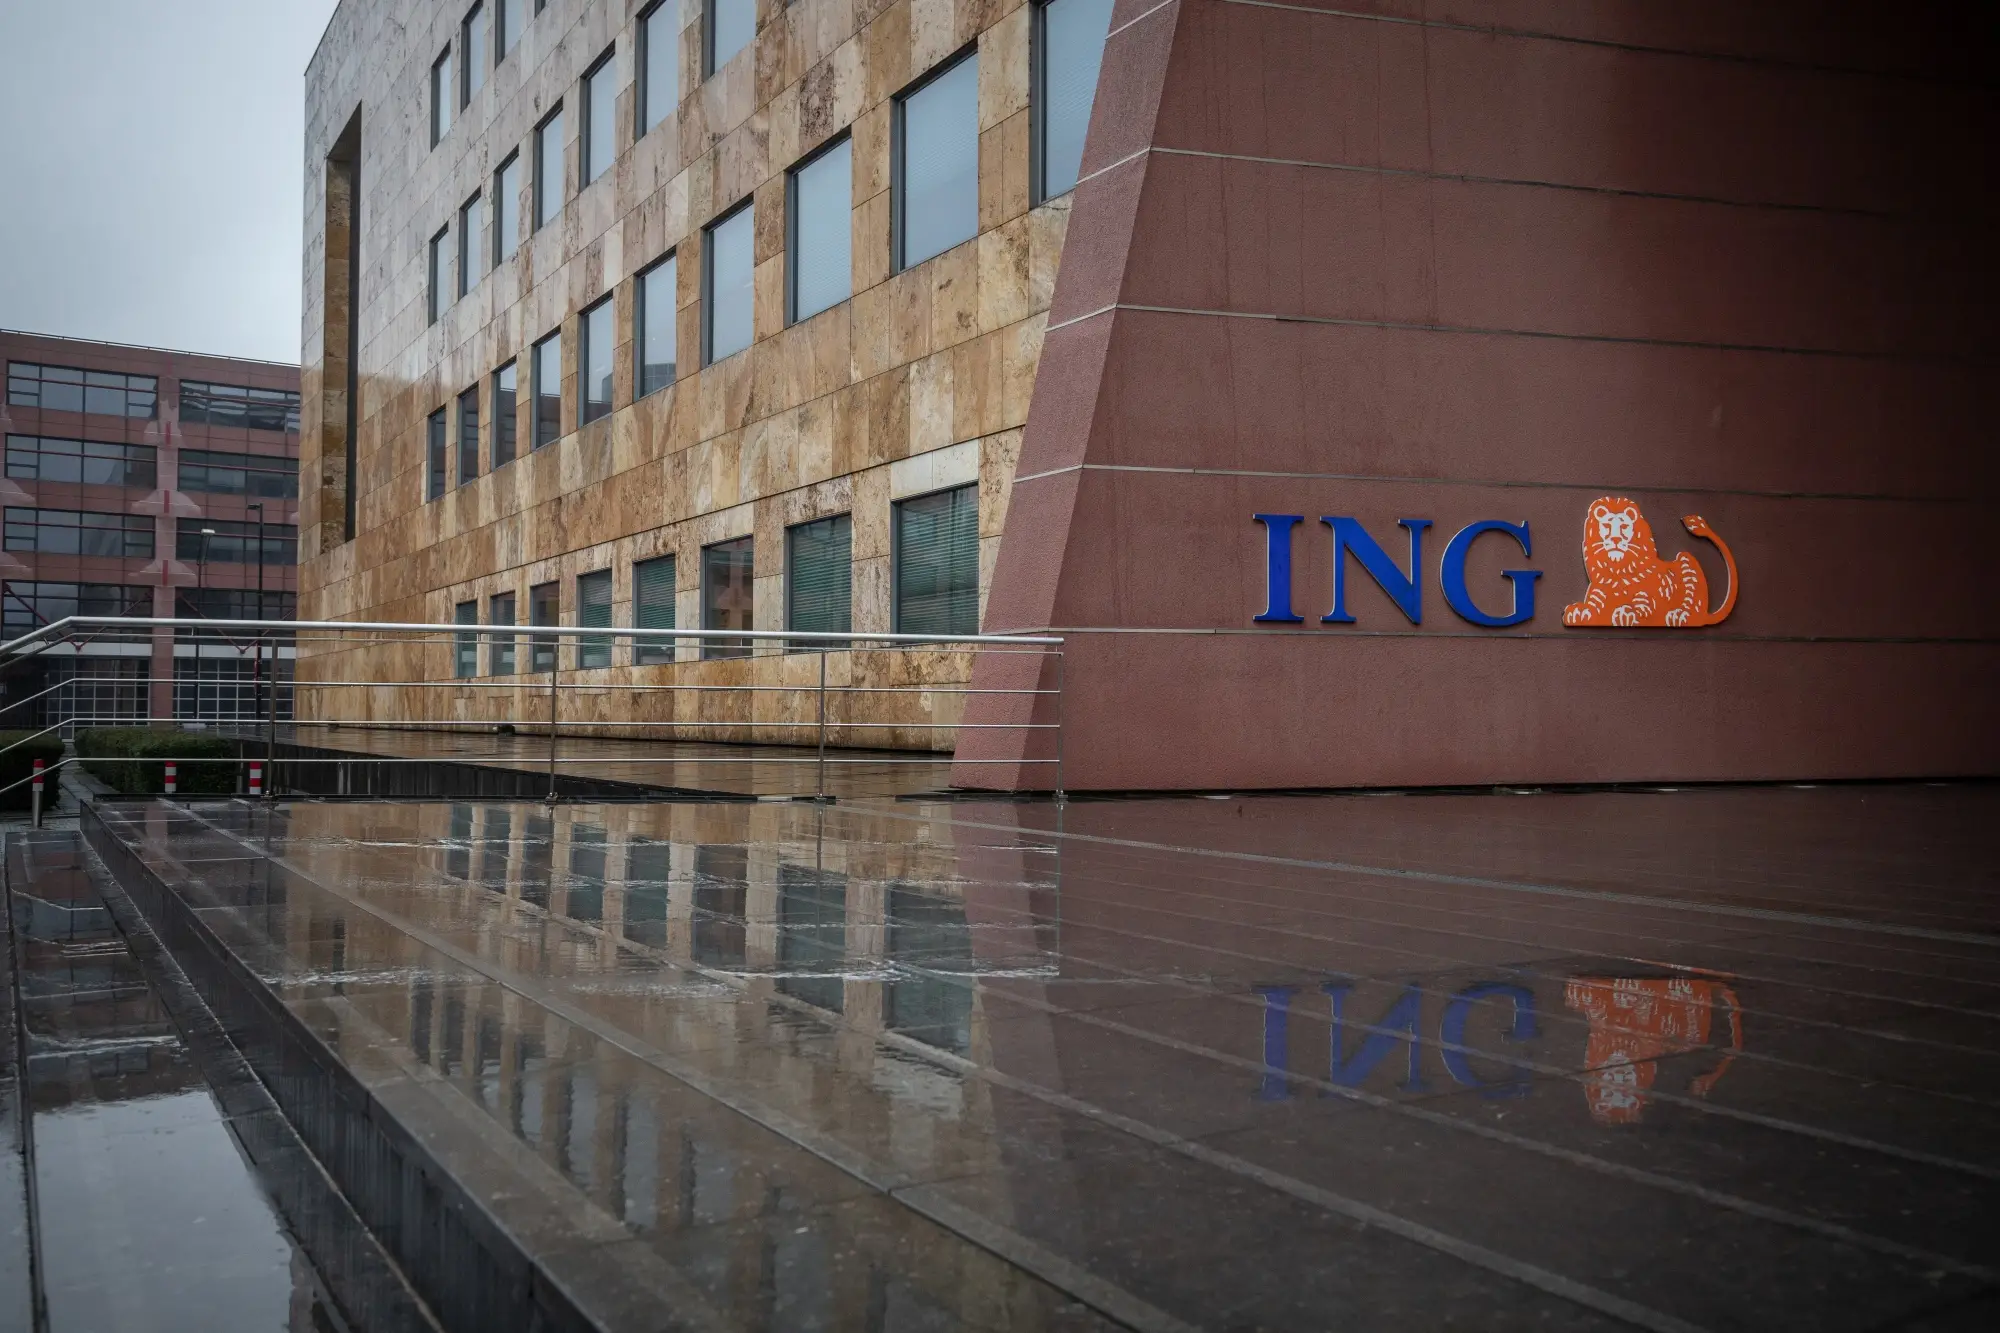 ING main lender to Thames Water parent amid uncertainty